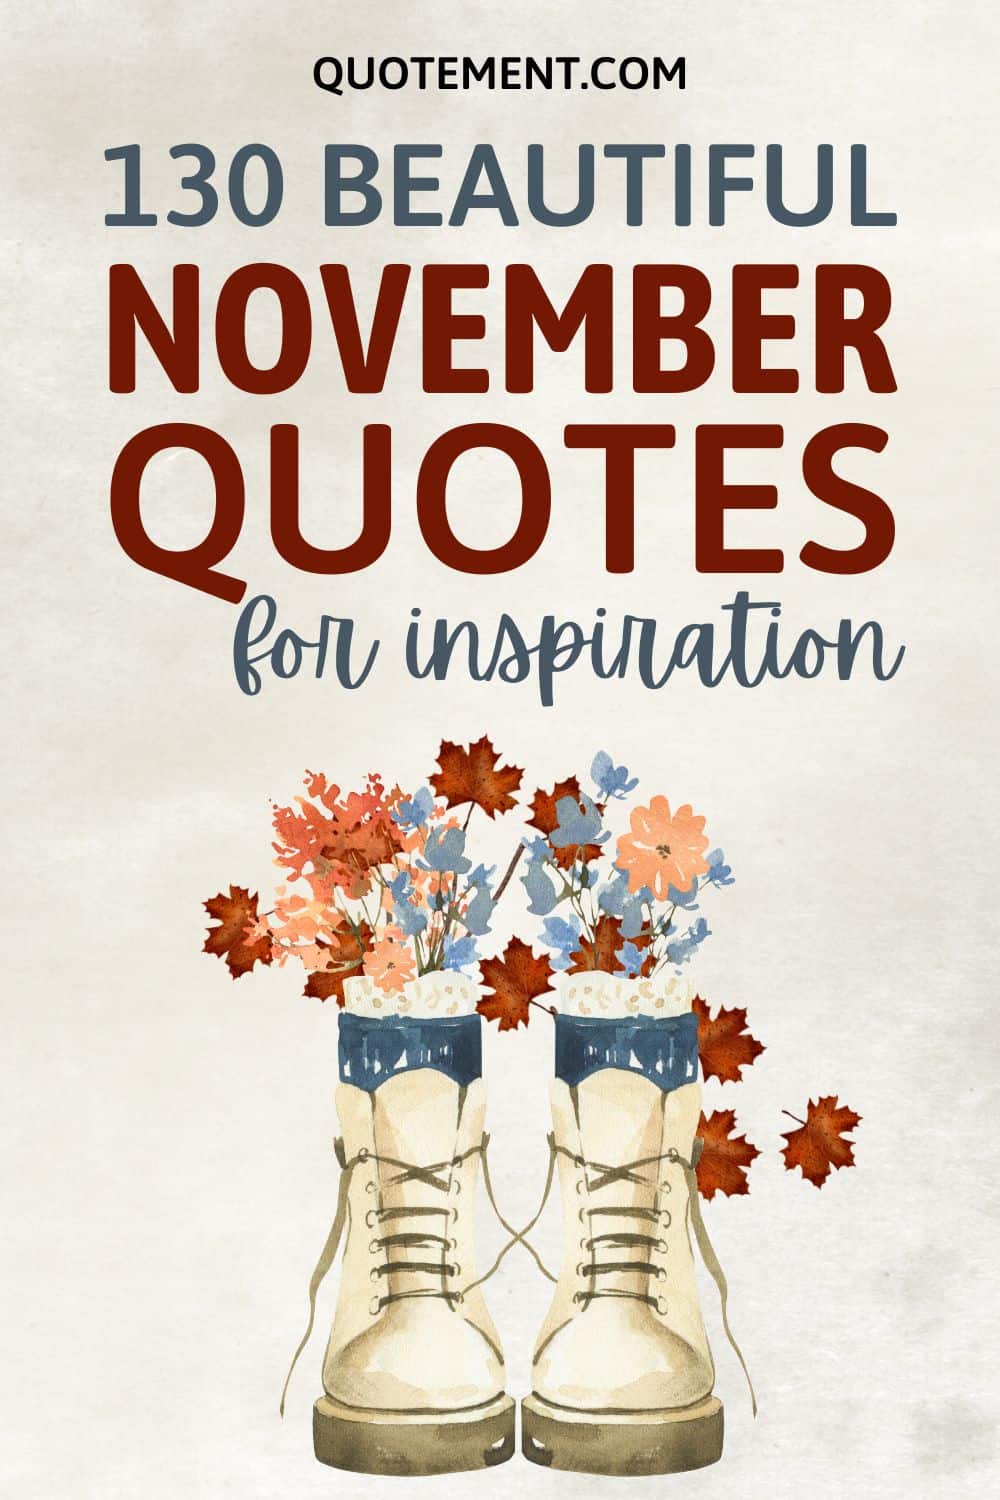 130 November Quotes To Embrace Change And See Magic In It
